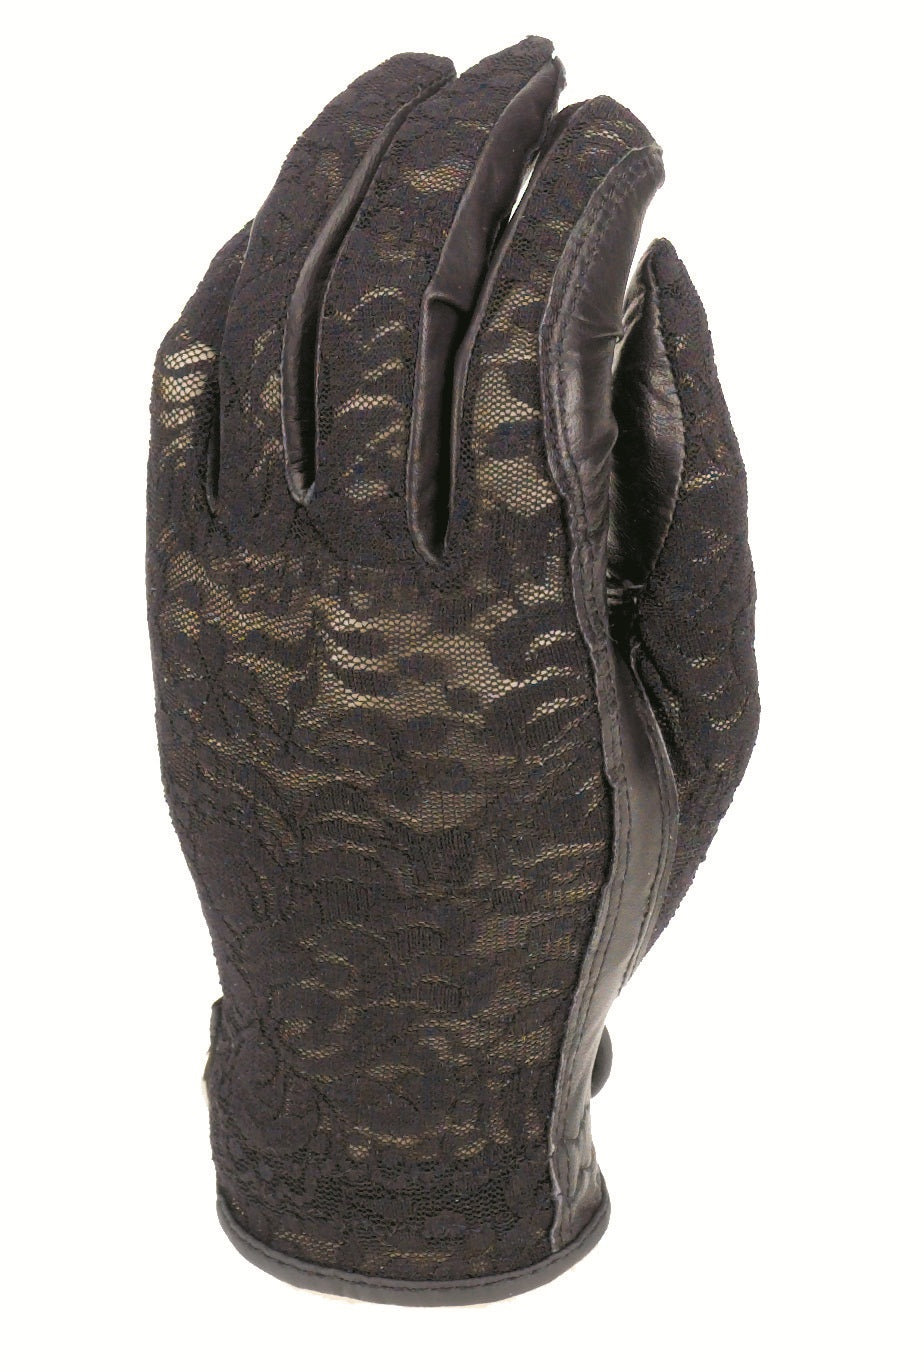 Evertan- Black Lace Golf Glove (for LeftHand)